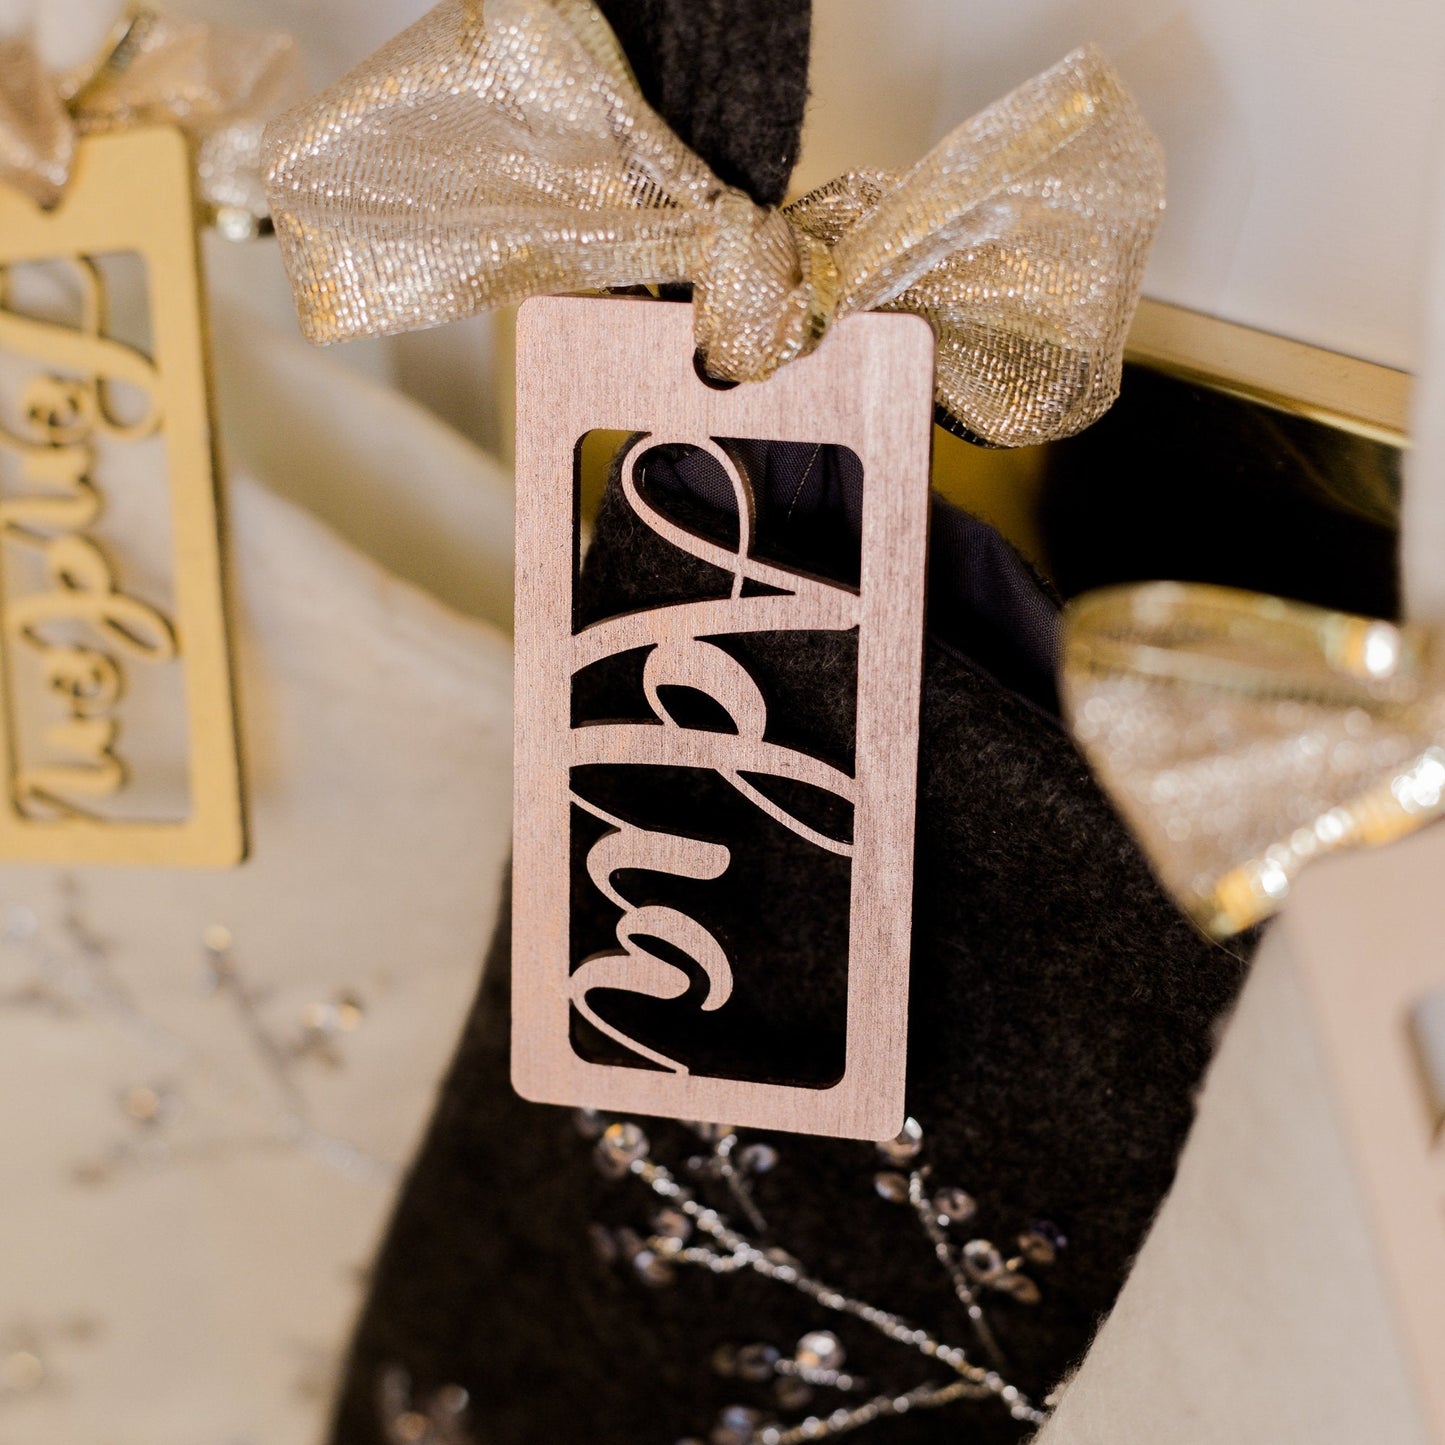 Personalized Wooden Stocking Tags, Script Font - Rose Gold Laser Cut Wood - "Adia" - by LeeMo Designs in Bend, Oregon